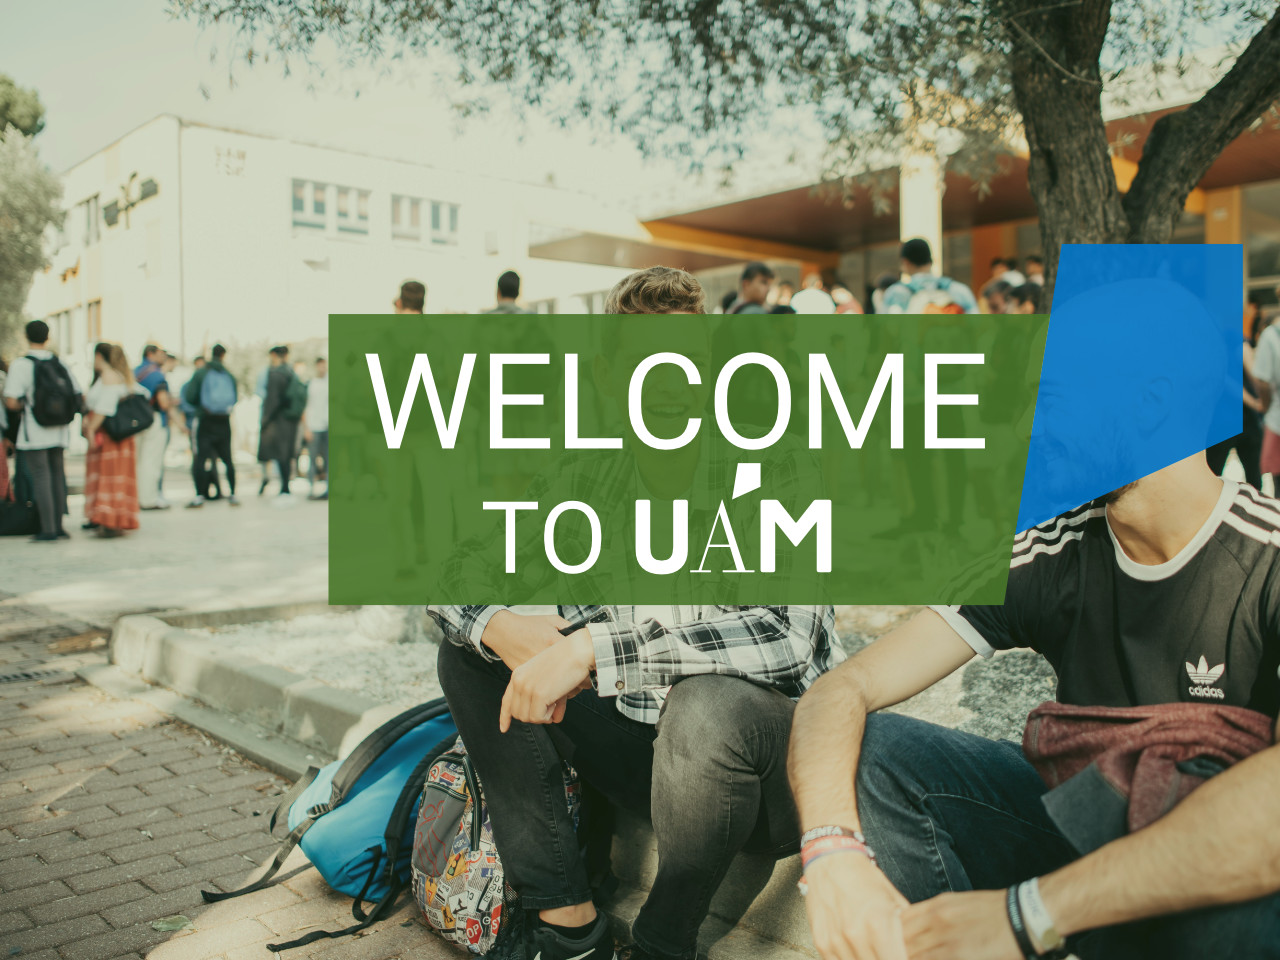 Welcome to the UAM. At UAM we receive more than 1,500 students from 65 different countries every year. Internationalization is one of our top priorities